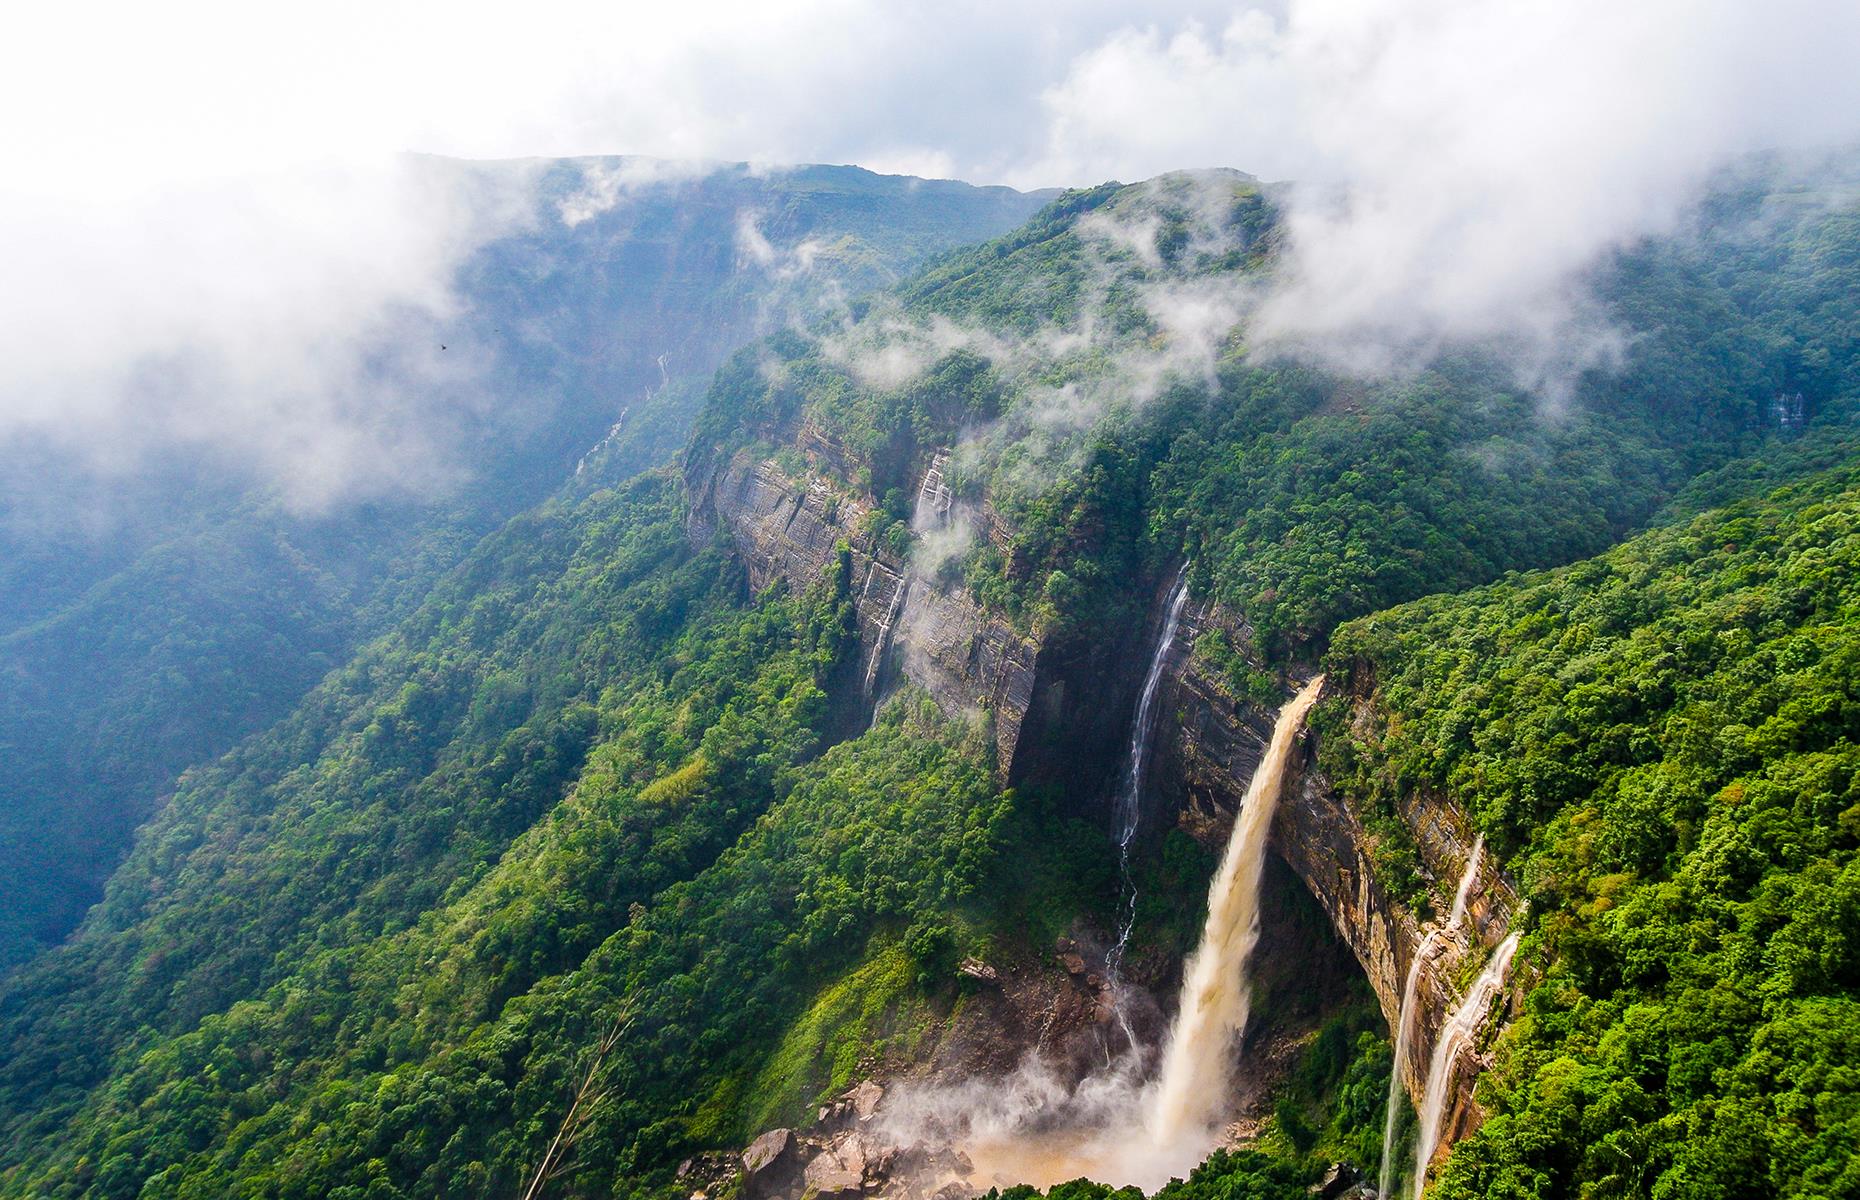 <p>These magnificent falls are where rainwater collected on a small plateau tumbles down over precipitous cliffs that reach 1,100 feet. It's the highest plunge waterfall in India and is at its strongest from December through February after the rainy season.</p>  <p>The beautiful falls have a bleak folktale attached to them about an unfortunate woman who, after her daughter was murdered by her husband, was tricked into eating her remains and eventually ran off the edge of the cliff where the water now flows.</p>